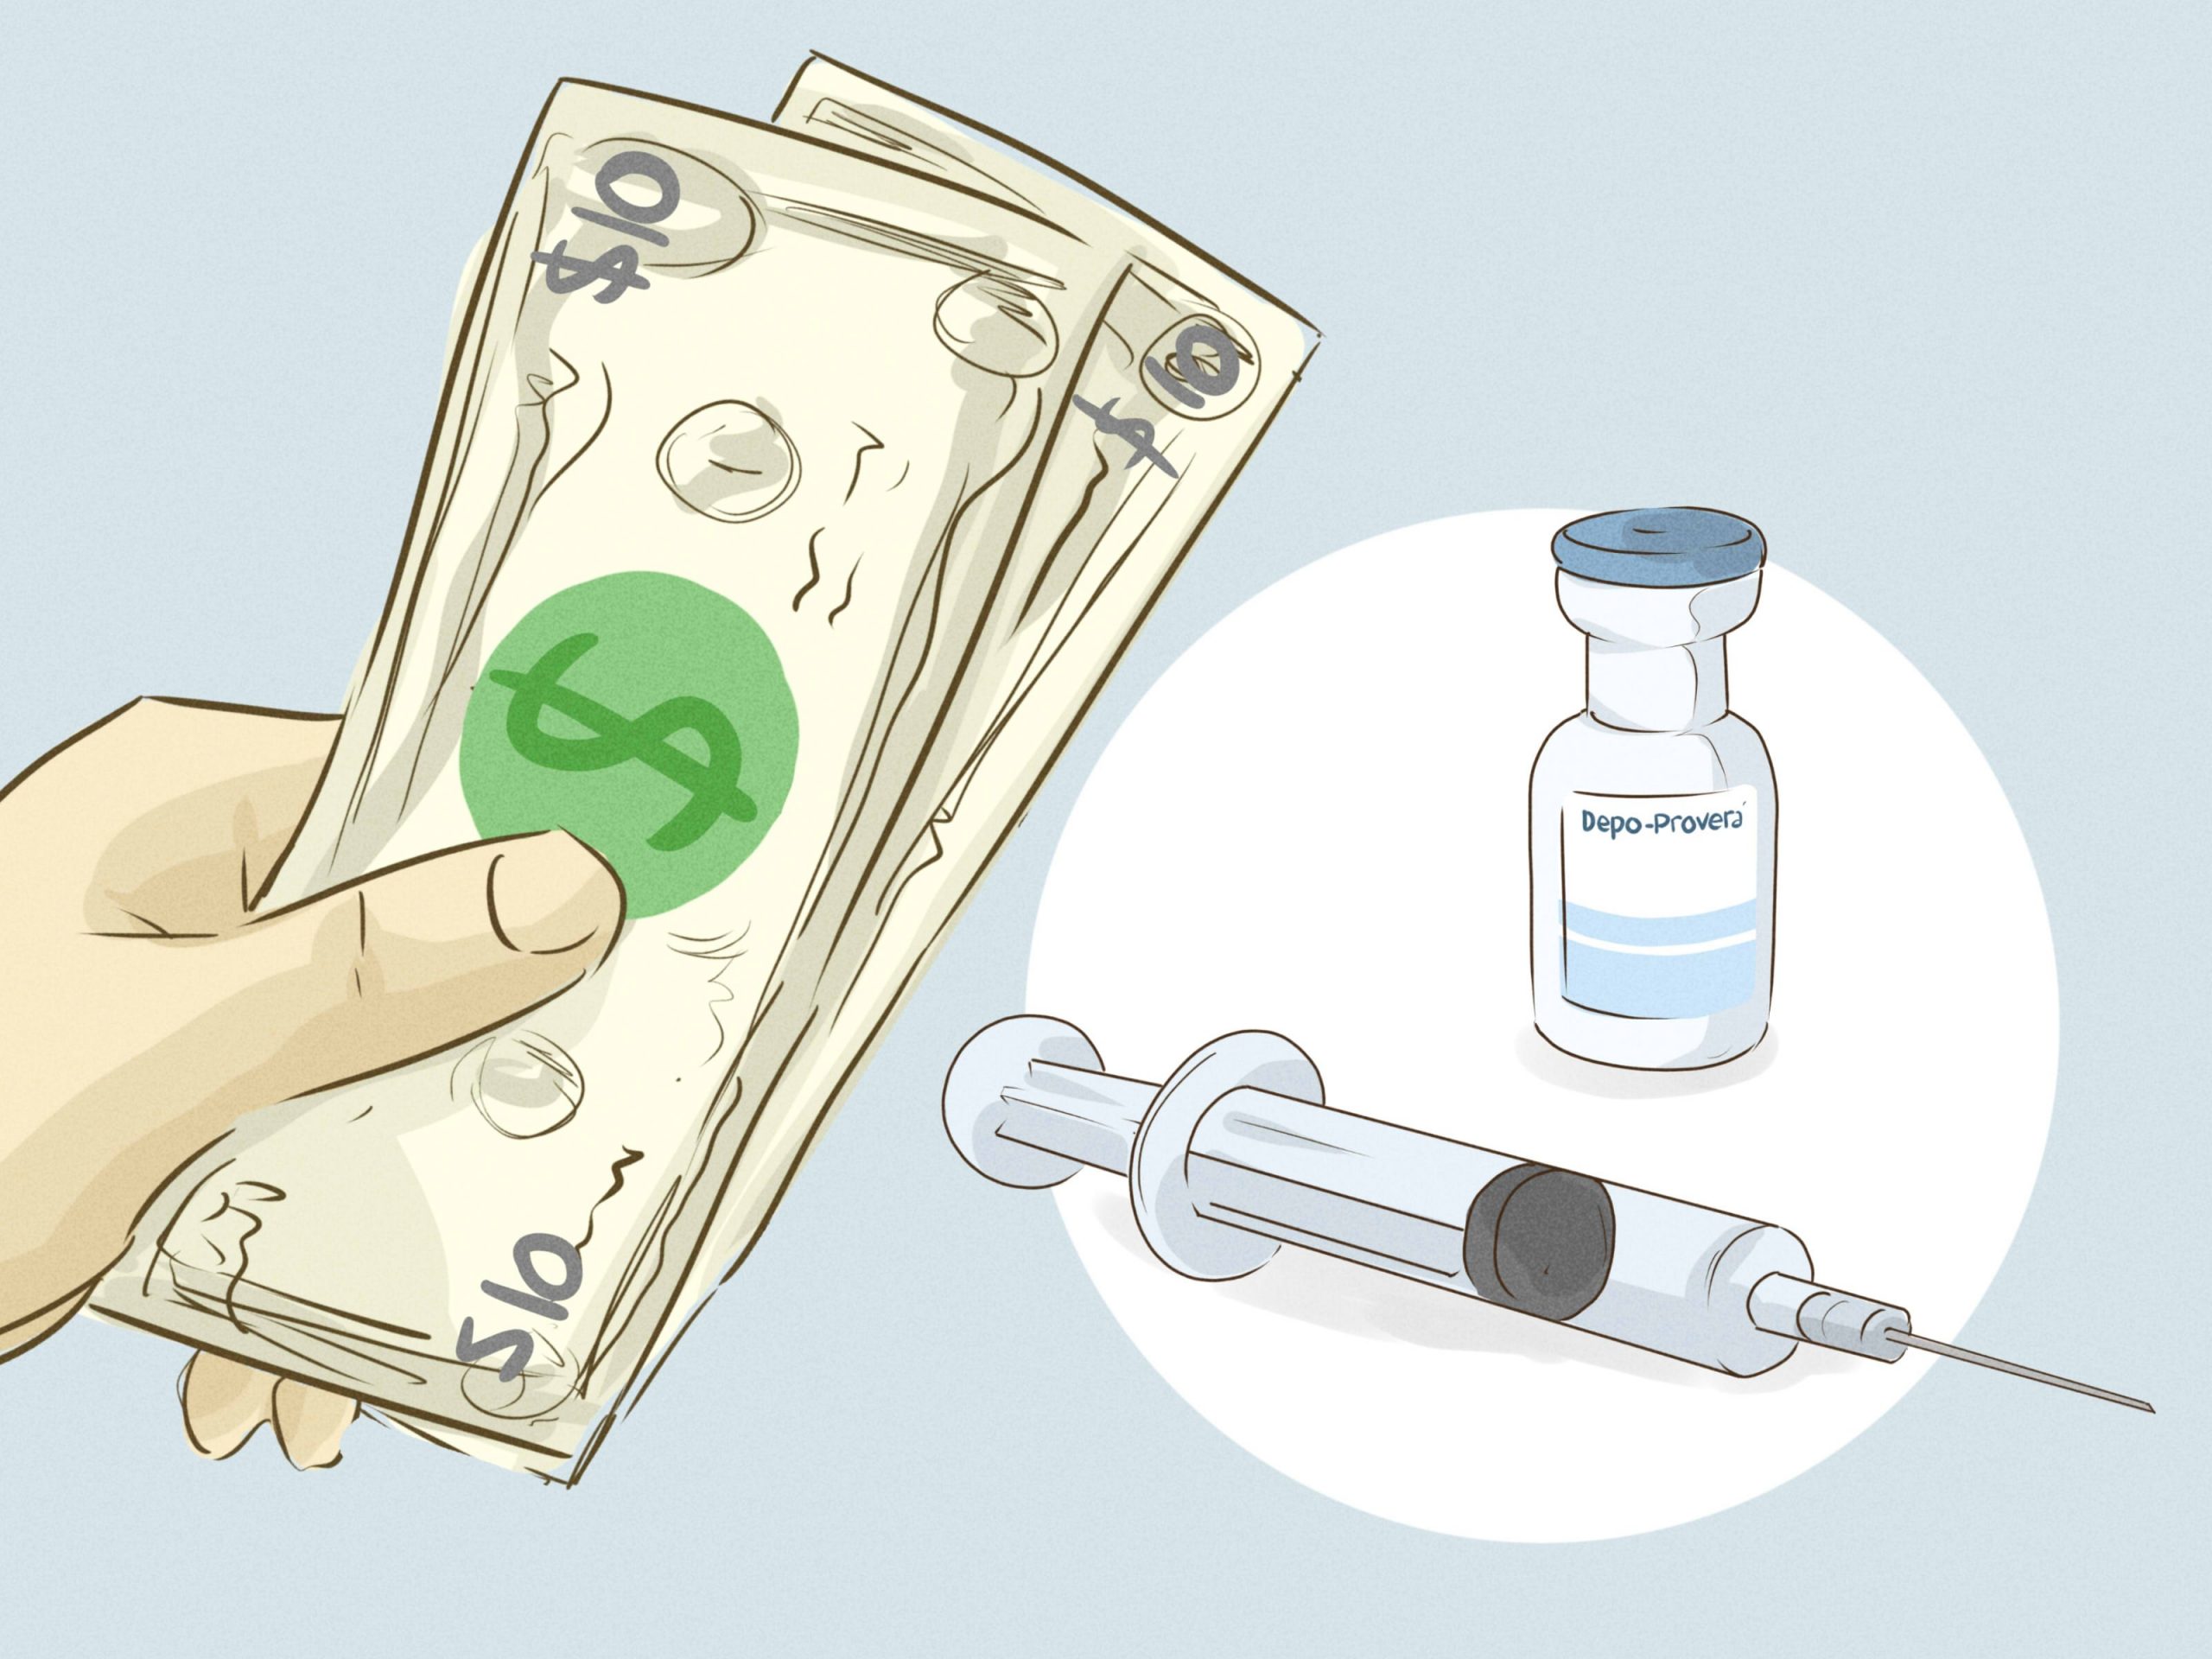 How To Give A Depo Shot: 14 Steps (With Pictures) - Wikihow  Administering Depo Provera